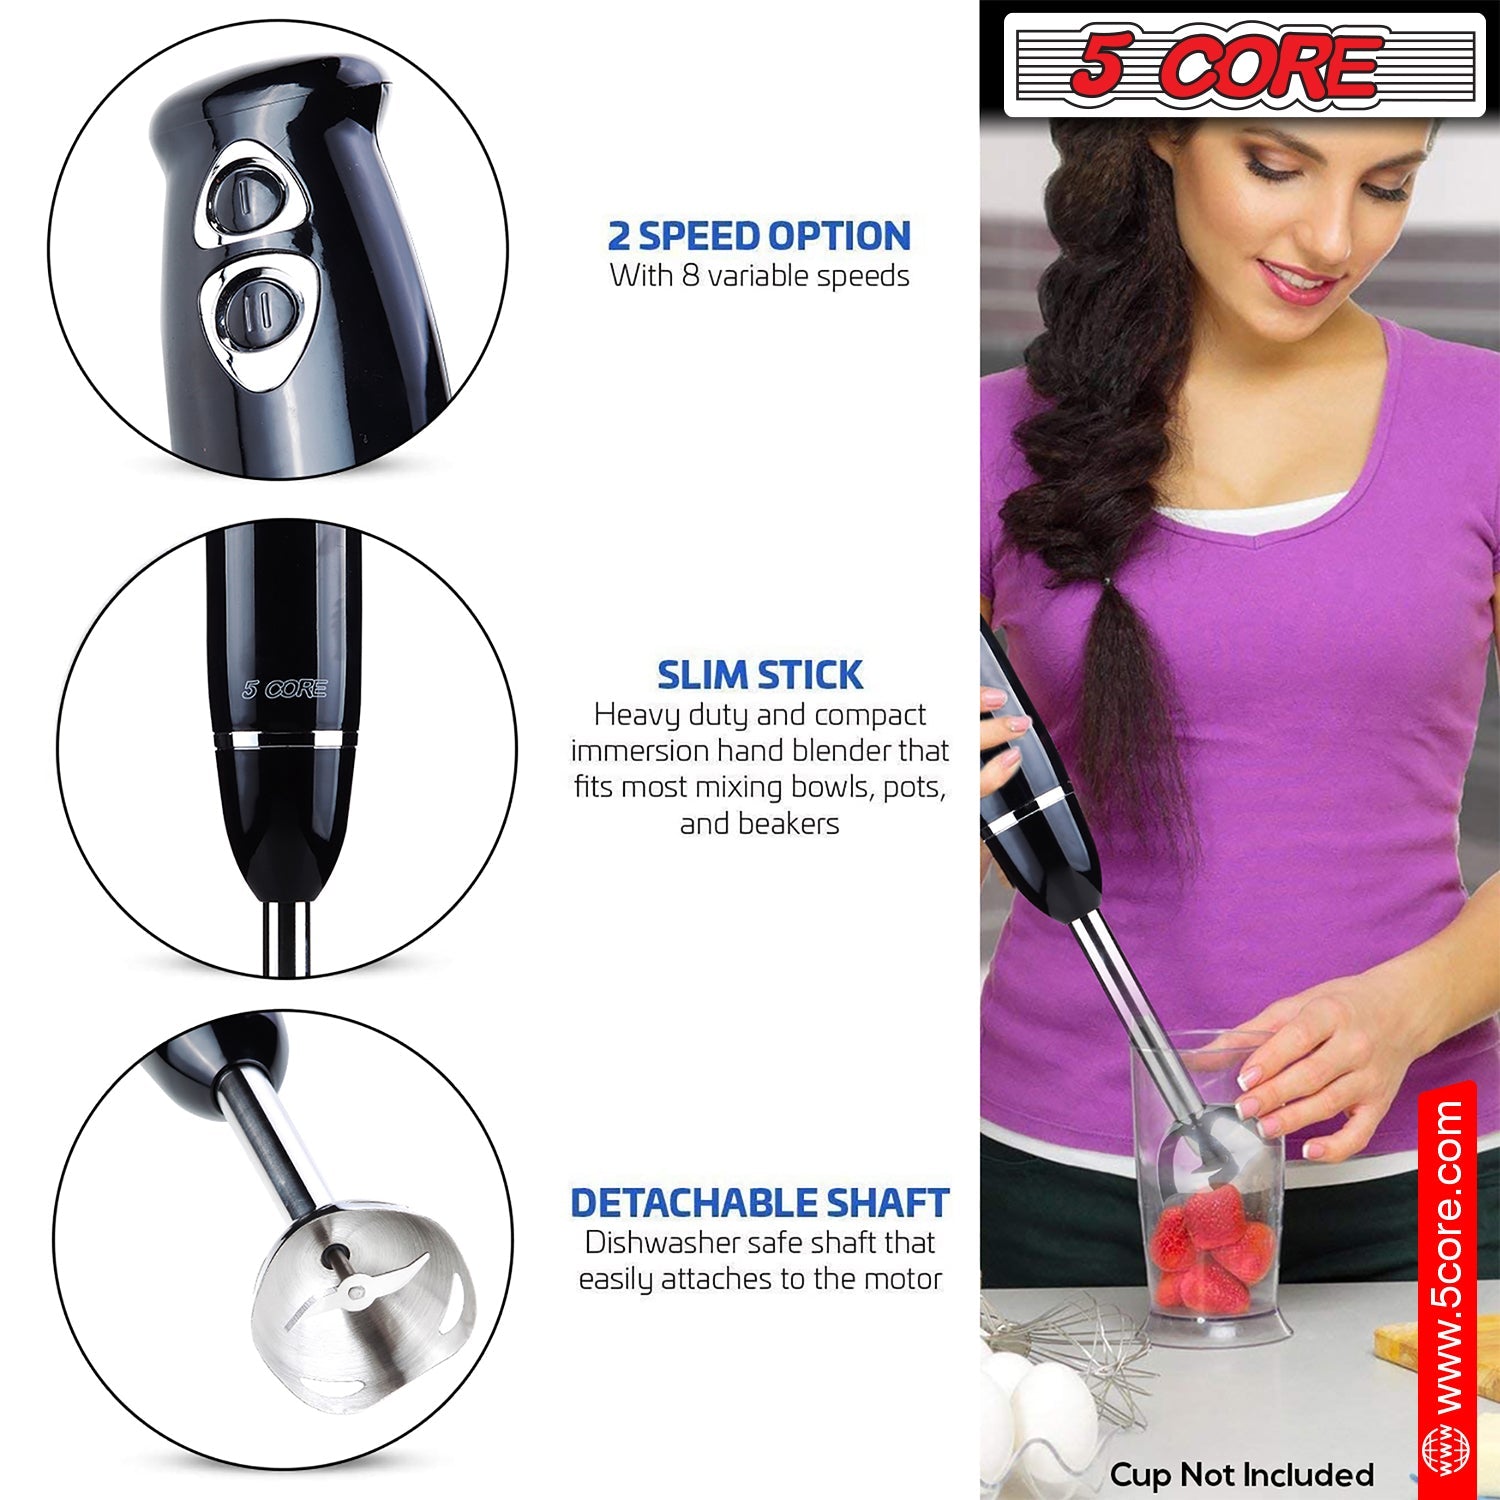 5Core Immersion Hand Blender 500W Electric Handheld Mixer w 2 Mixing Speed for Smoothies Puree-4